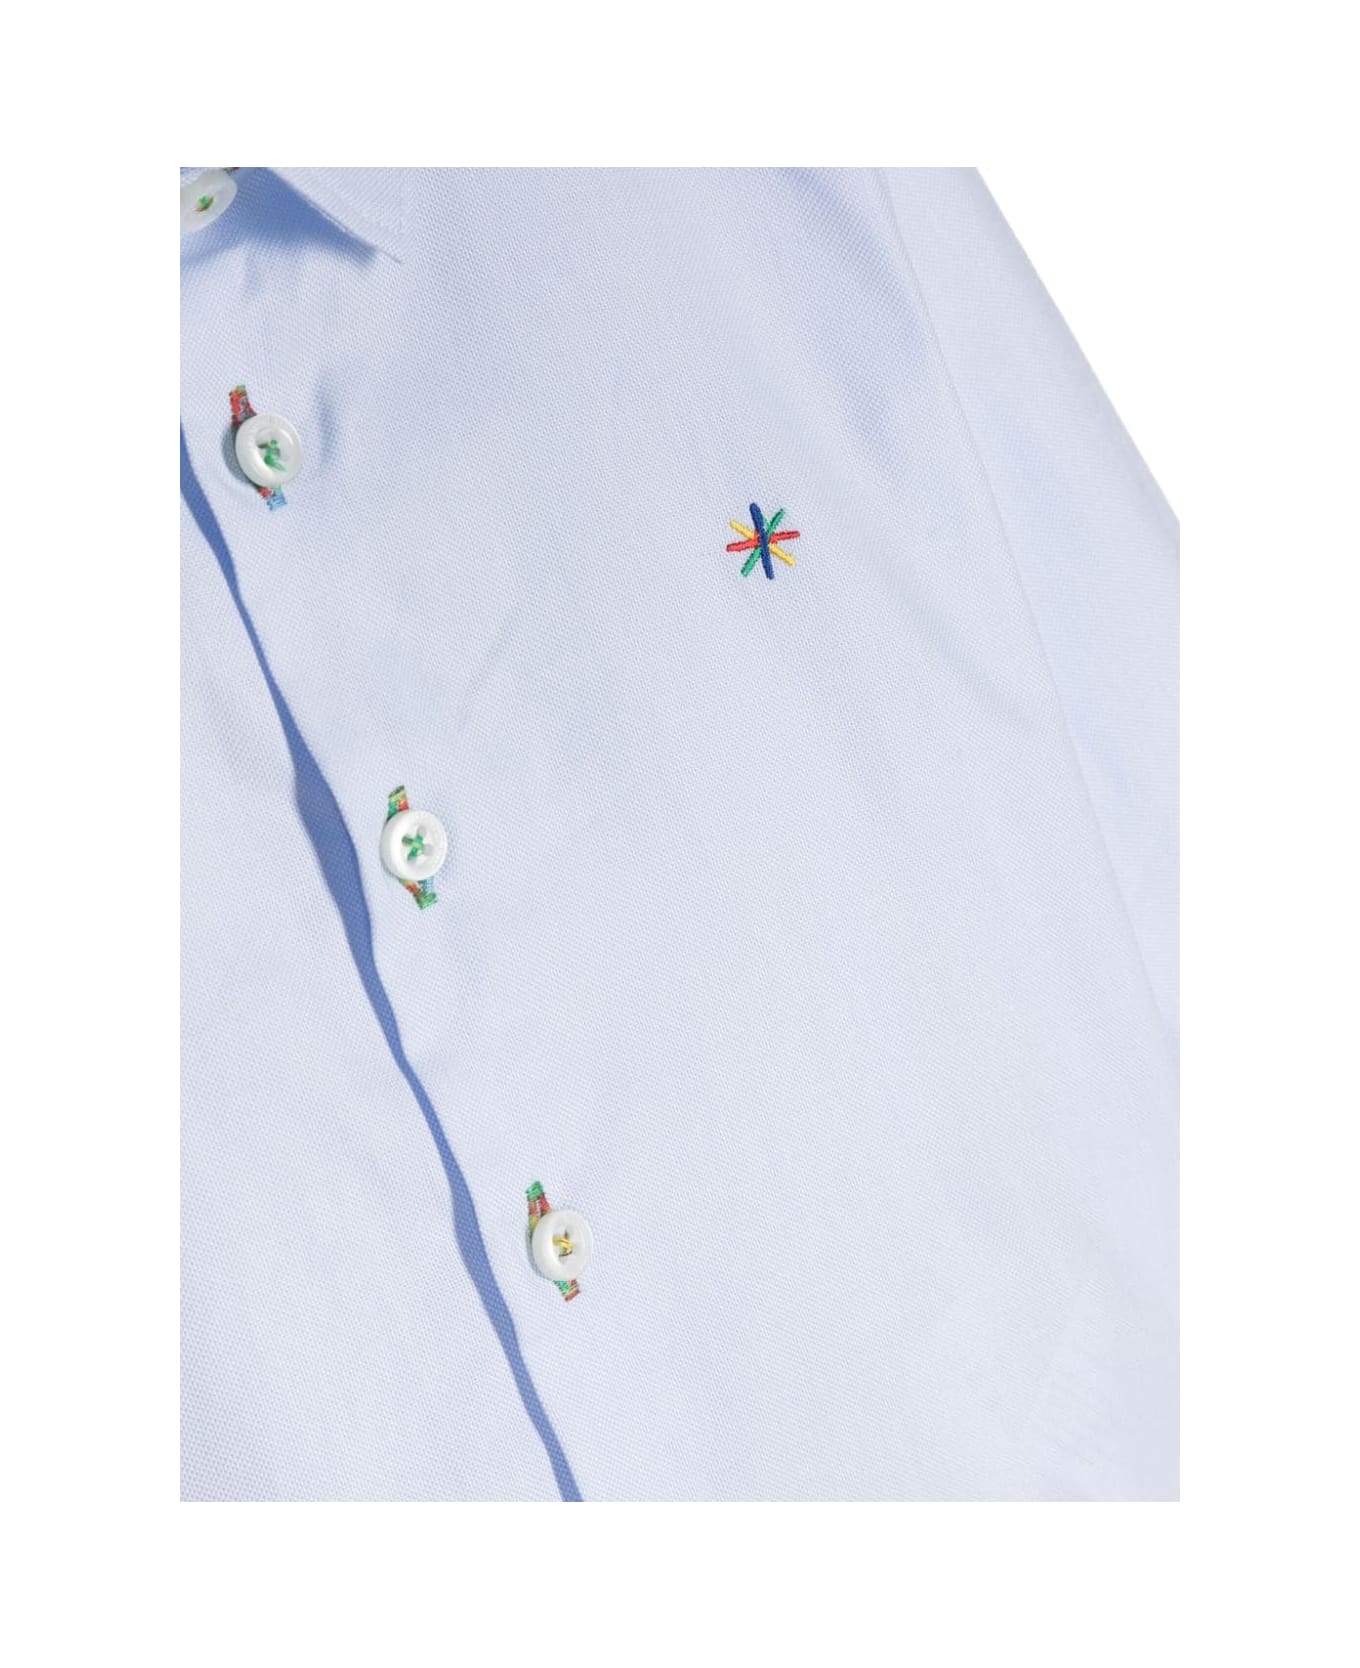 Manuel Ritz Shirt With Embroidery - Light front